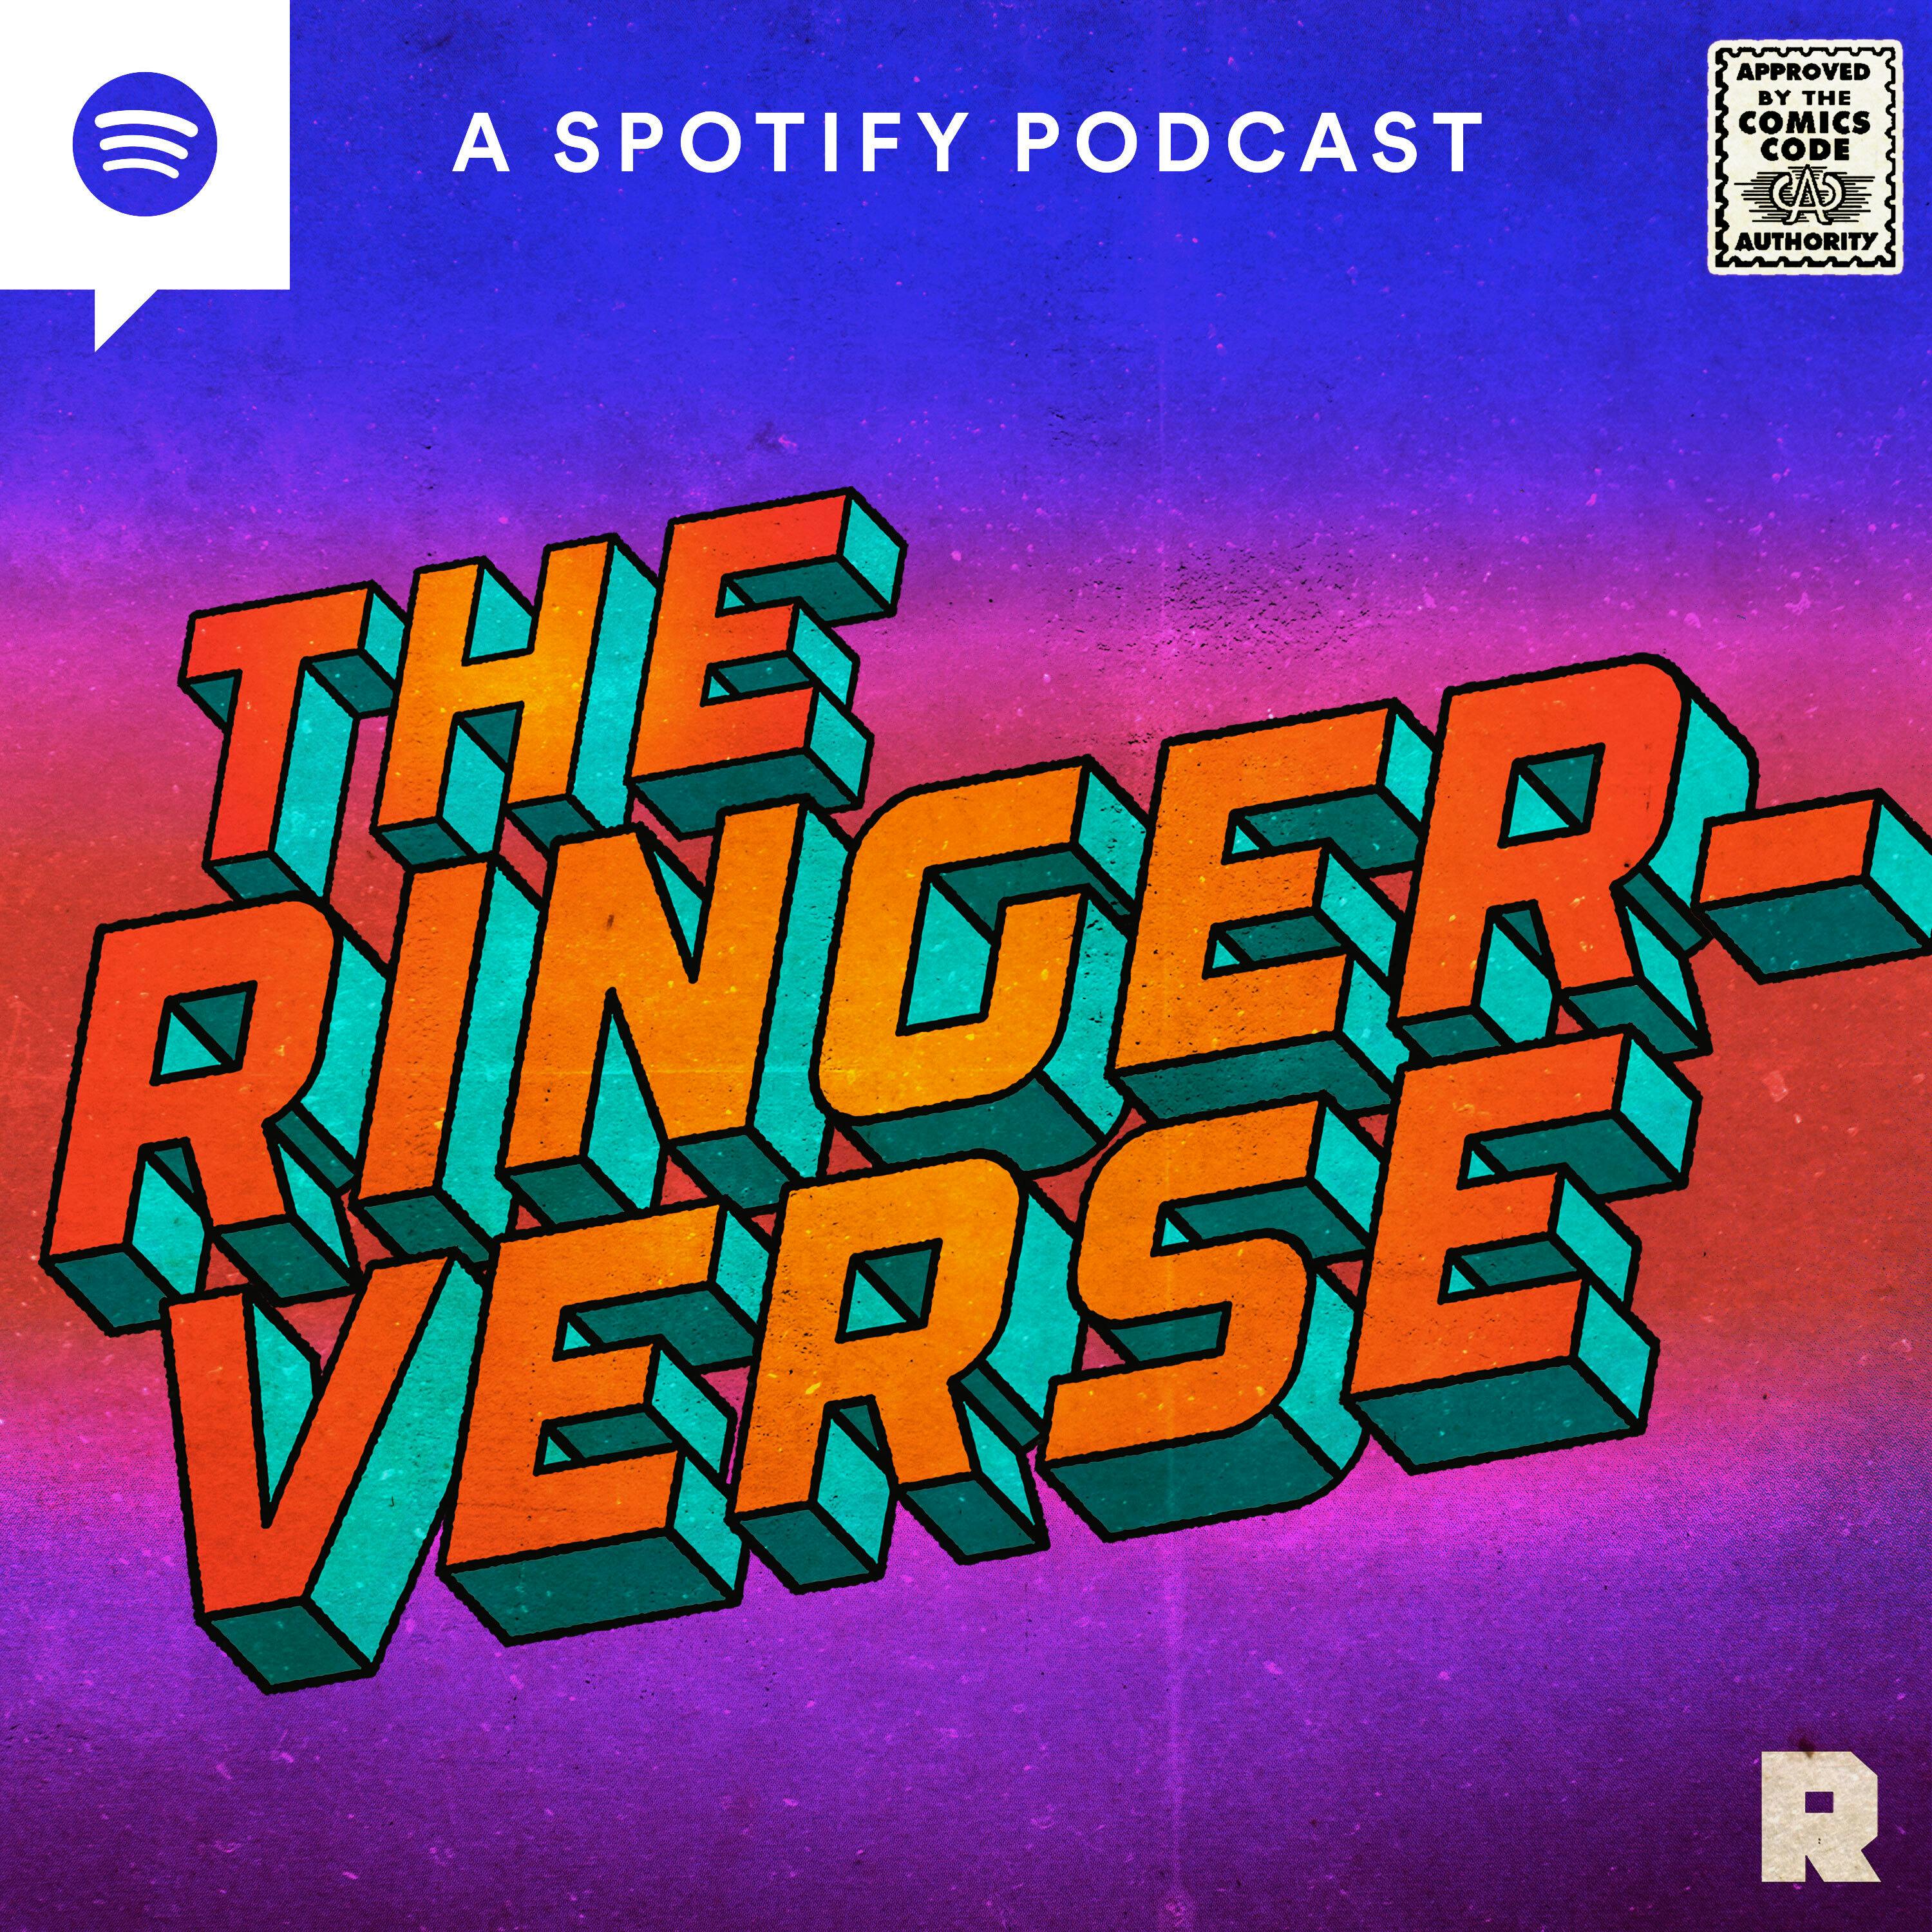 The Ringer-Verse podcast